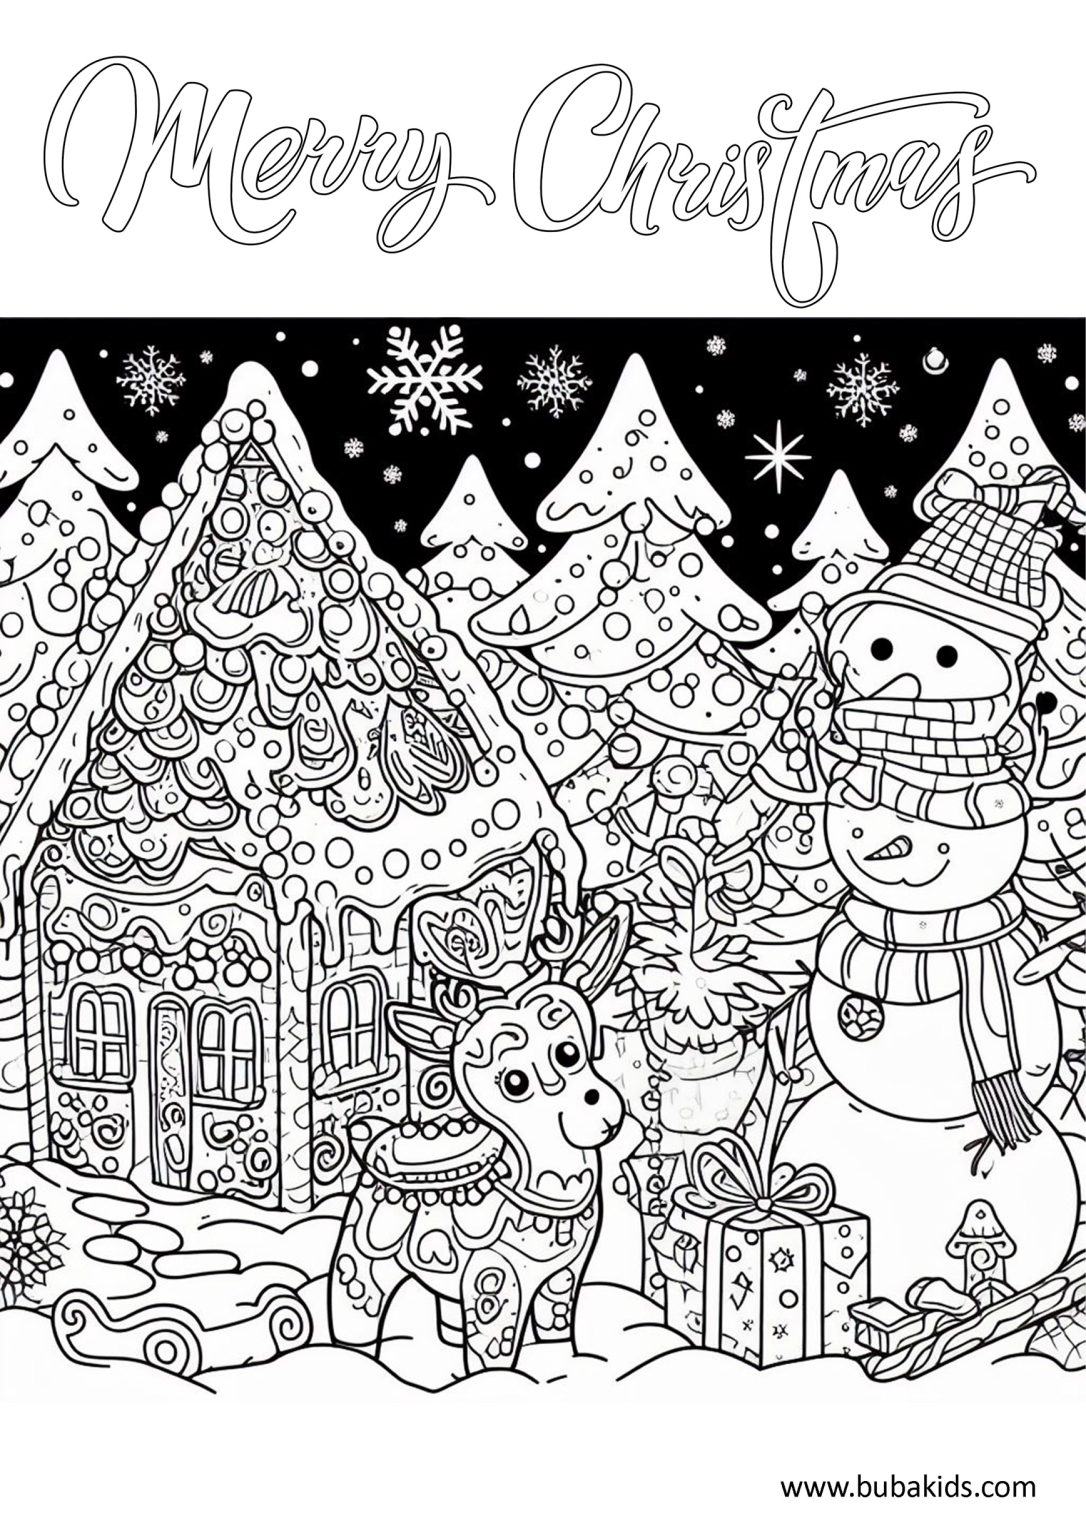 Best christmas theme coloring page | BubaKids.com